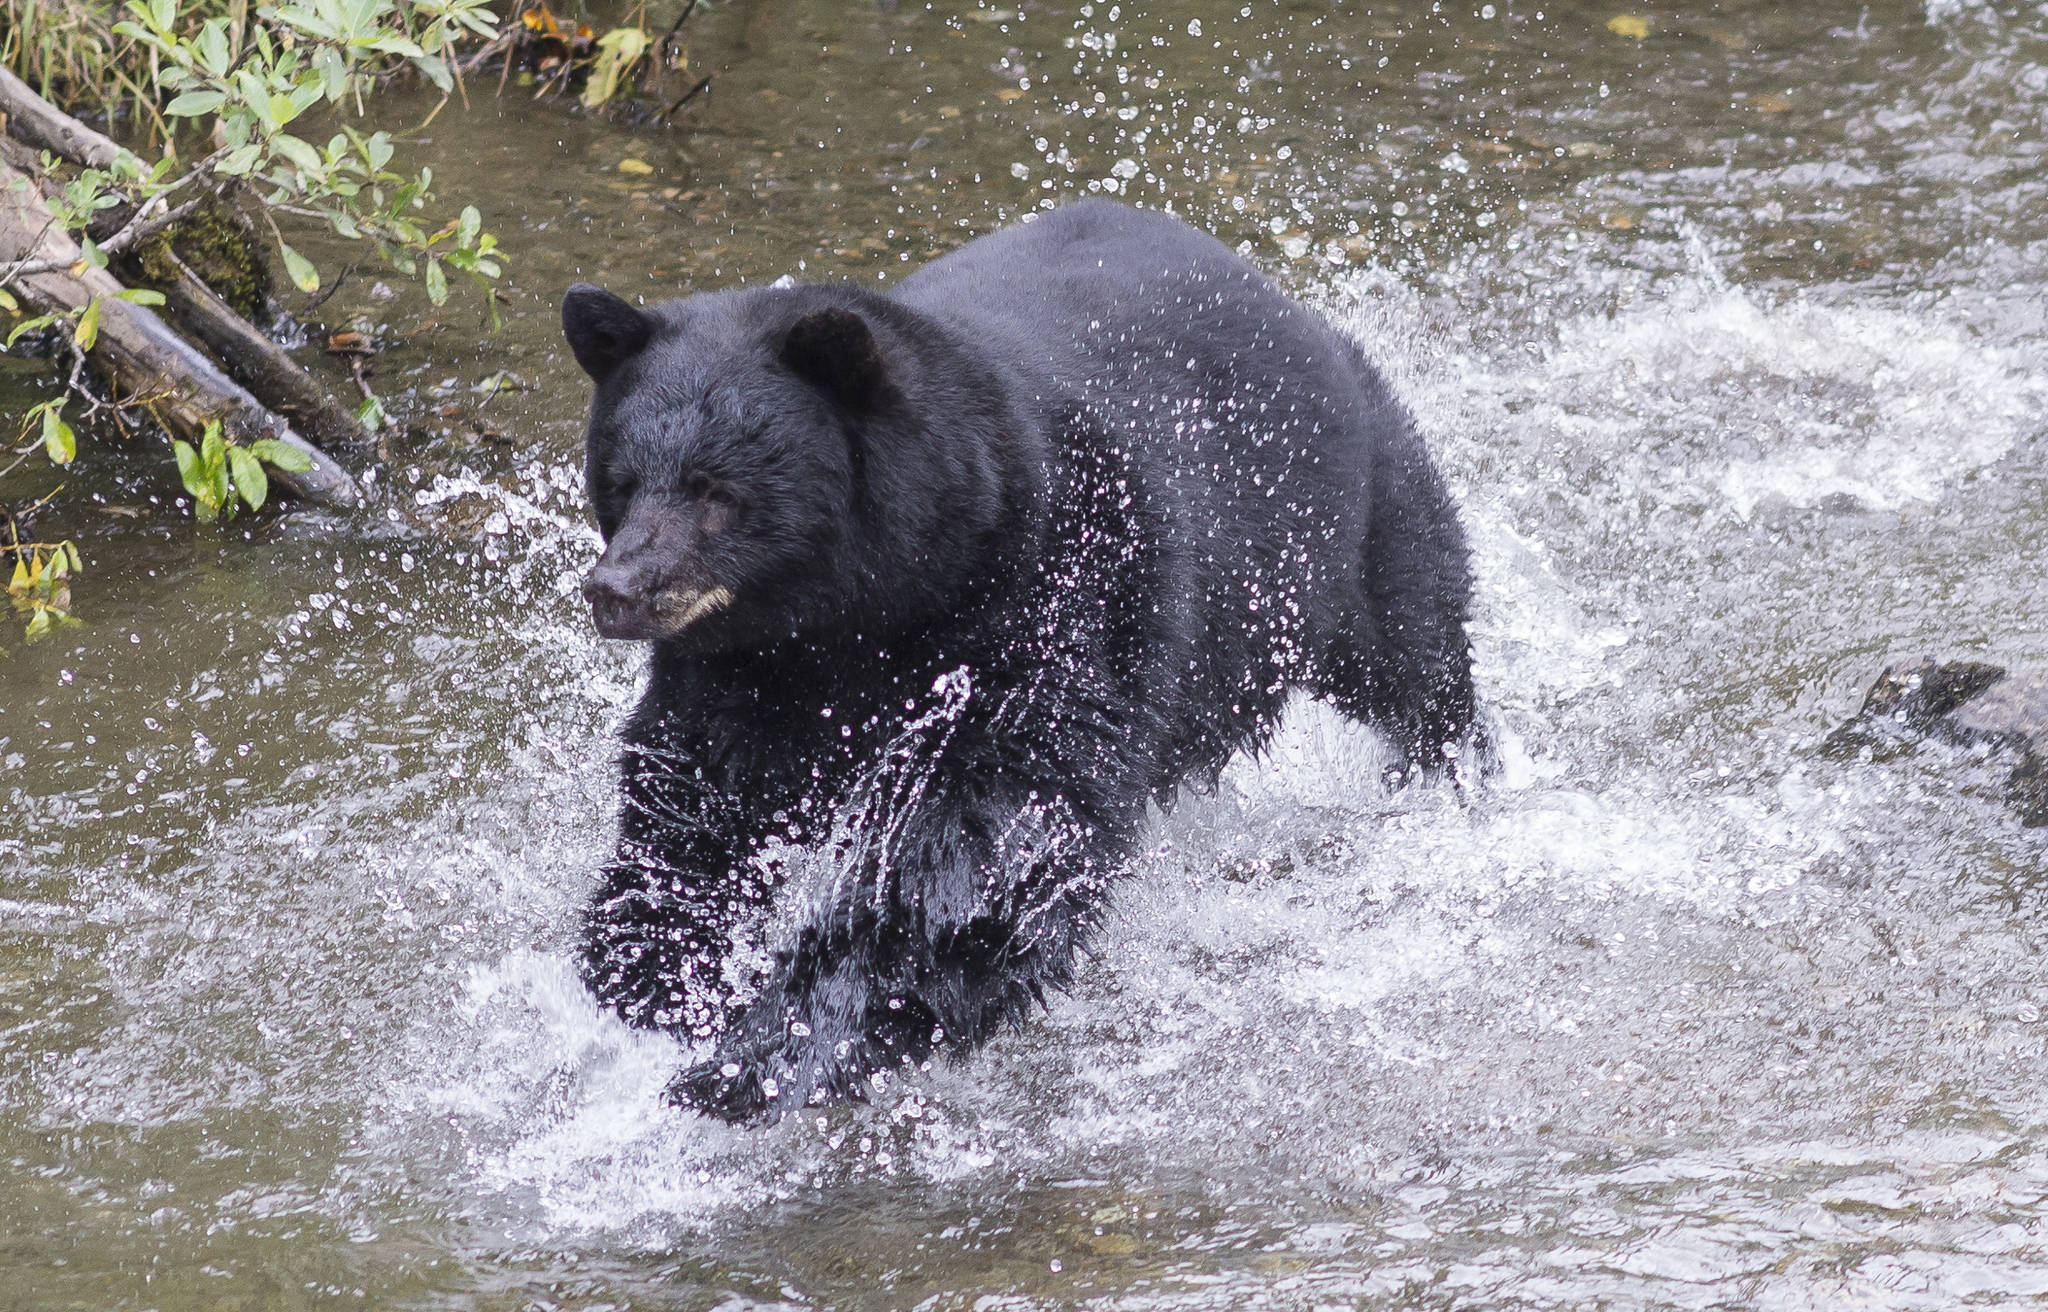 A male black bear chases spawning sockeye salmon in Steep Creek at the Mendenhall Glacier Visitor Center on Thursday, August 16, 2018. (Michael Penn | Juneau Empire)                                A male black bear chases spawning sockeye salmon in Steep Creek at the Mendenhall Glacier Visitor Center on August 16, 2018. (Michael Penn/Juneau Empire)